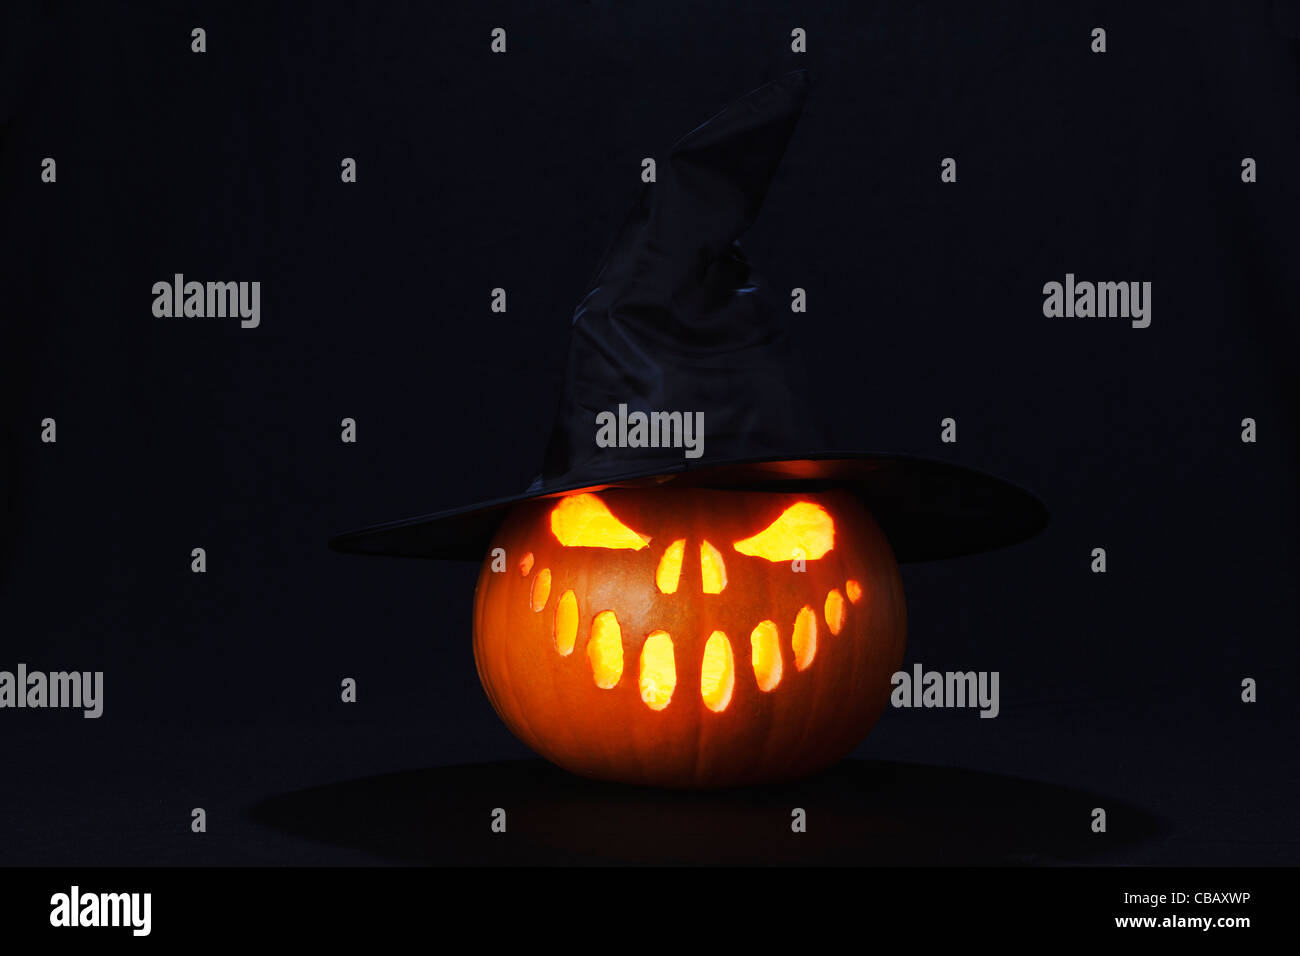 Halloween pumpkin lantern with evil face and witches hat lit with a candle Stock Photo